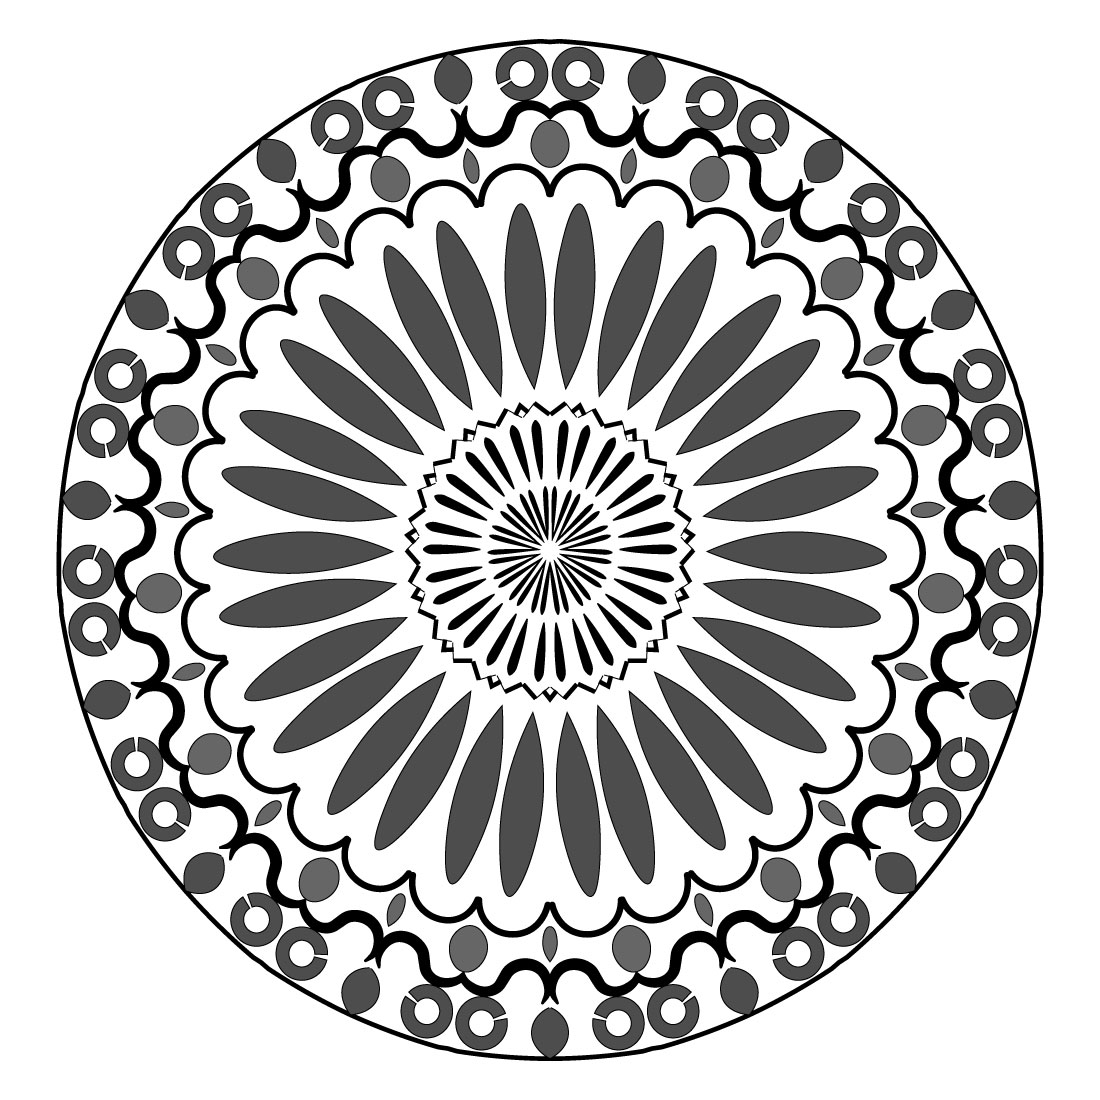 mandala with baack and white rounded circuls 1 646